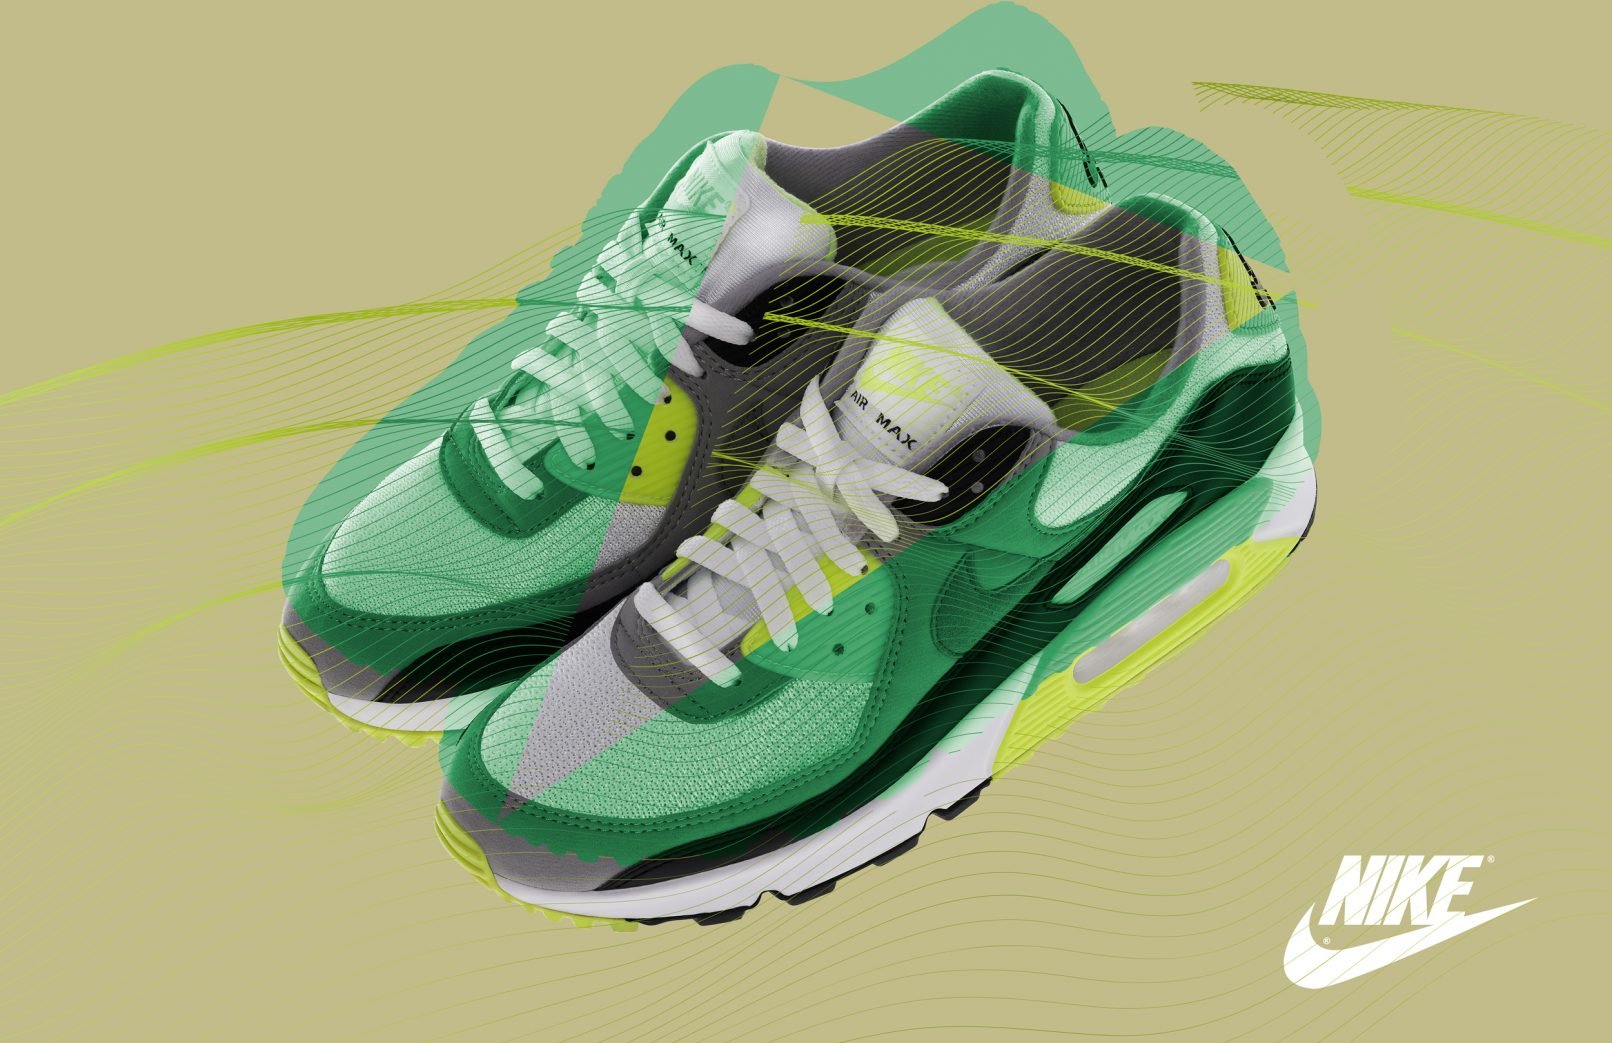 Nike Air Max 90s Maikel Thijssen Photography graphics 1